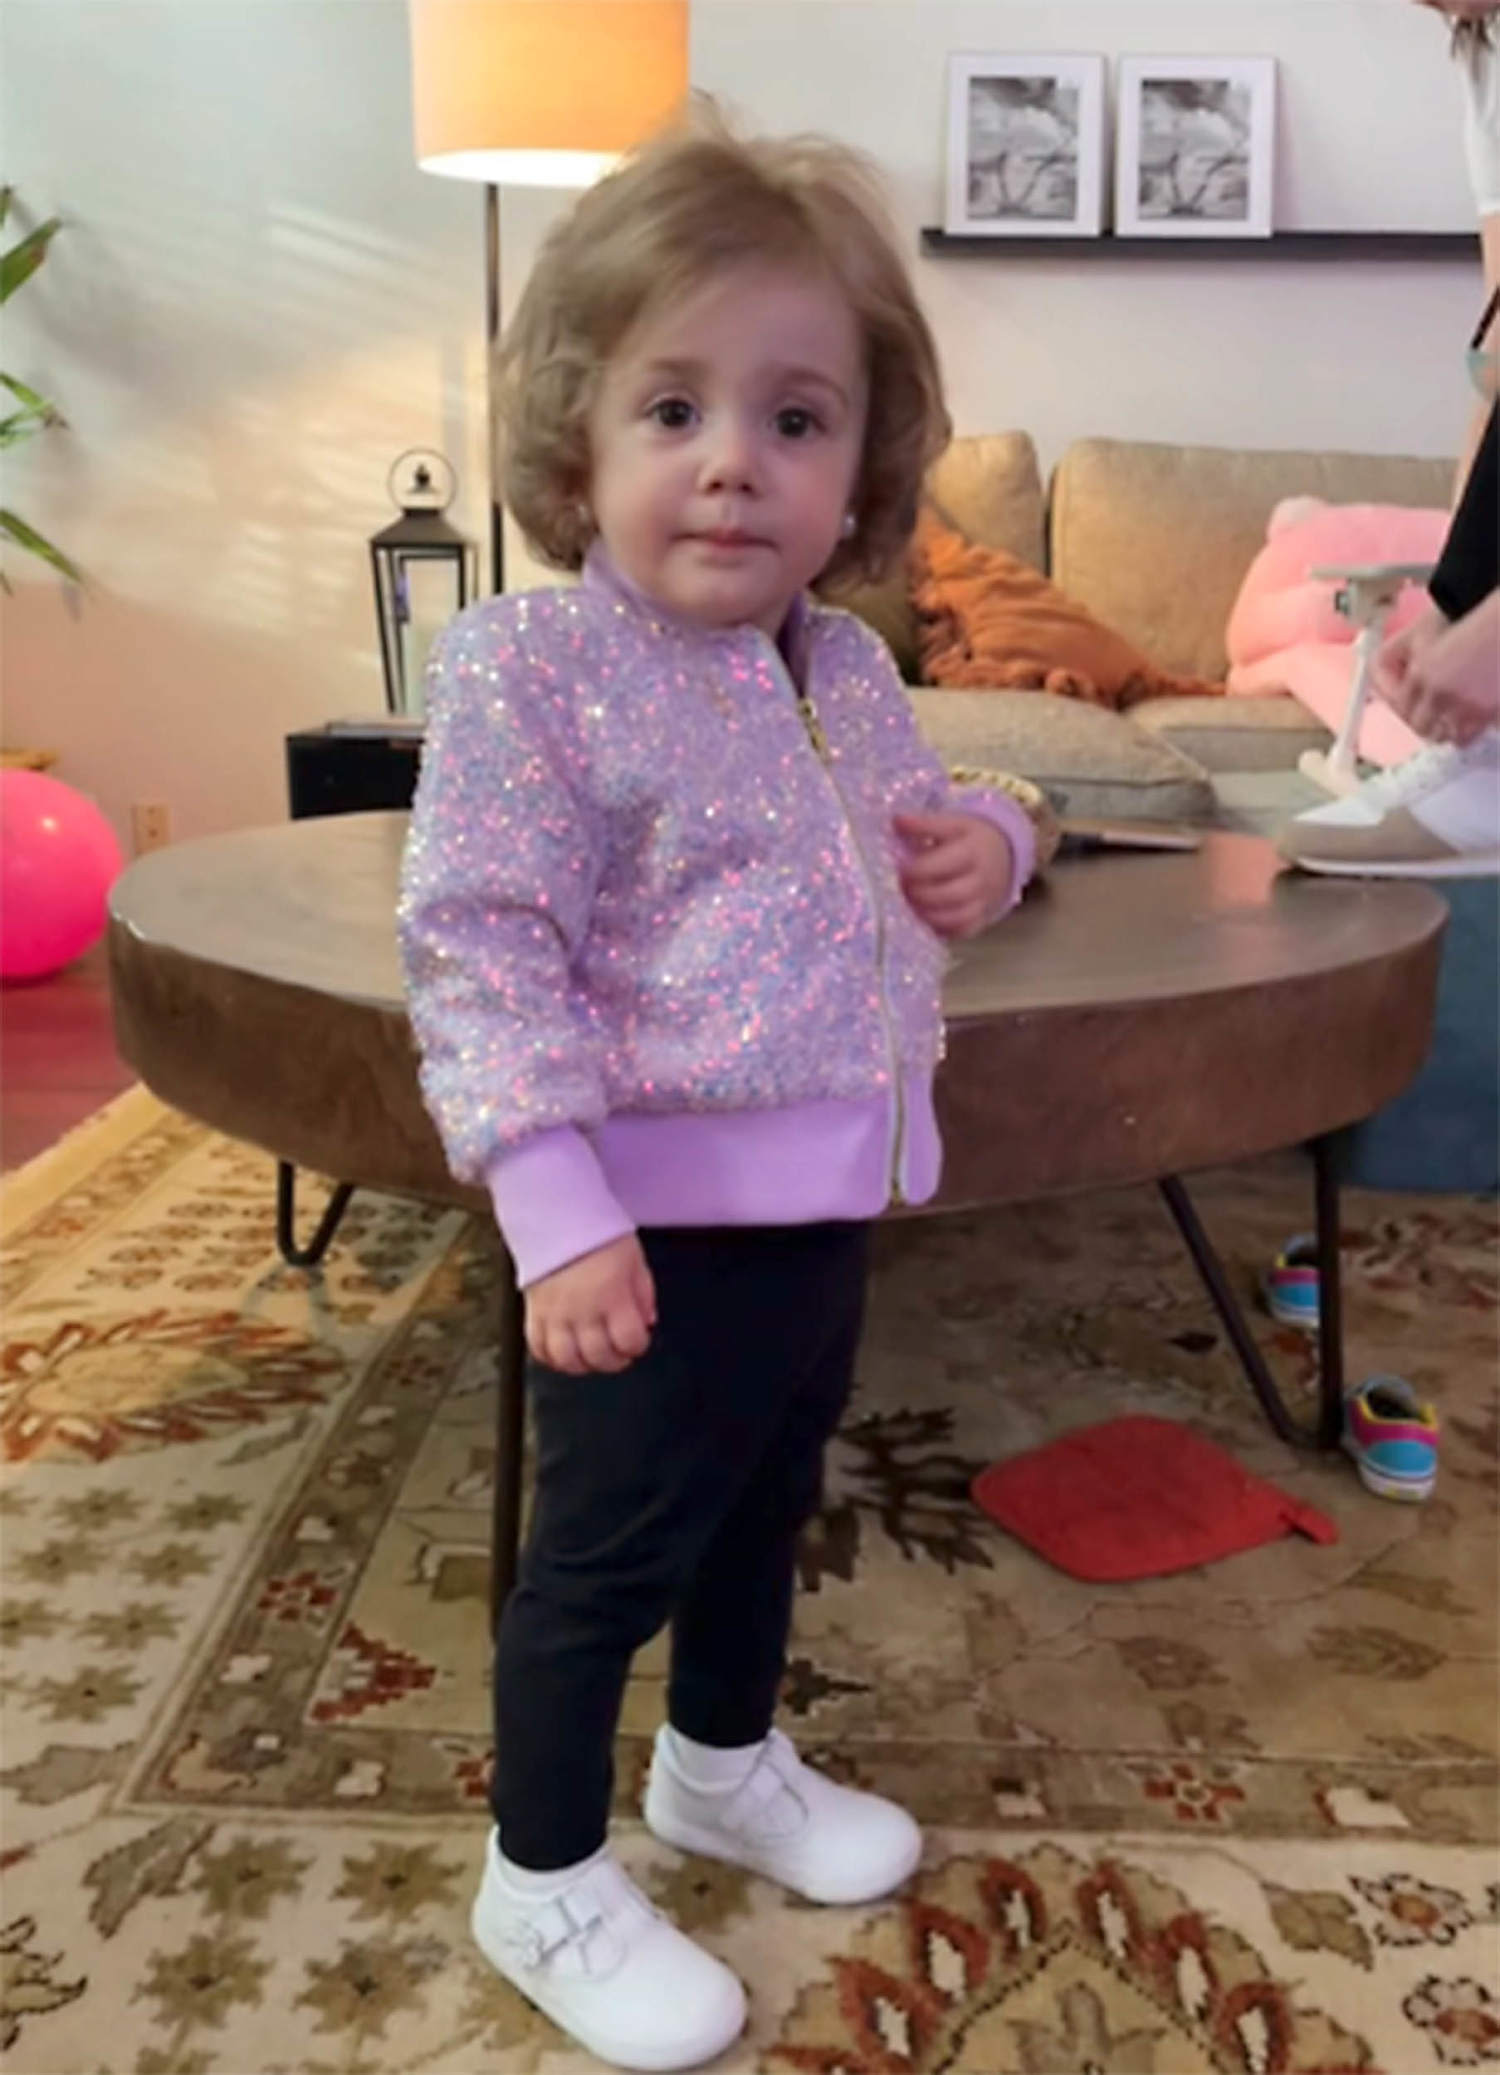 Thank YOU for being a friend: 'Golden Girls' toddler visits “The Kelly Clarkson Show”